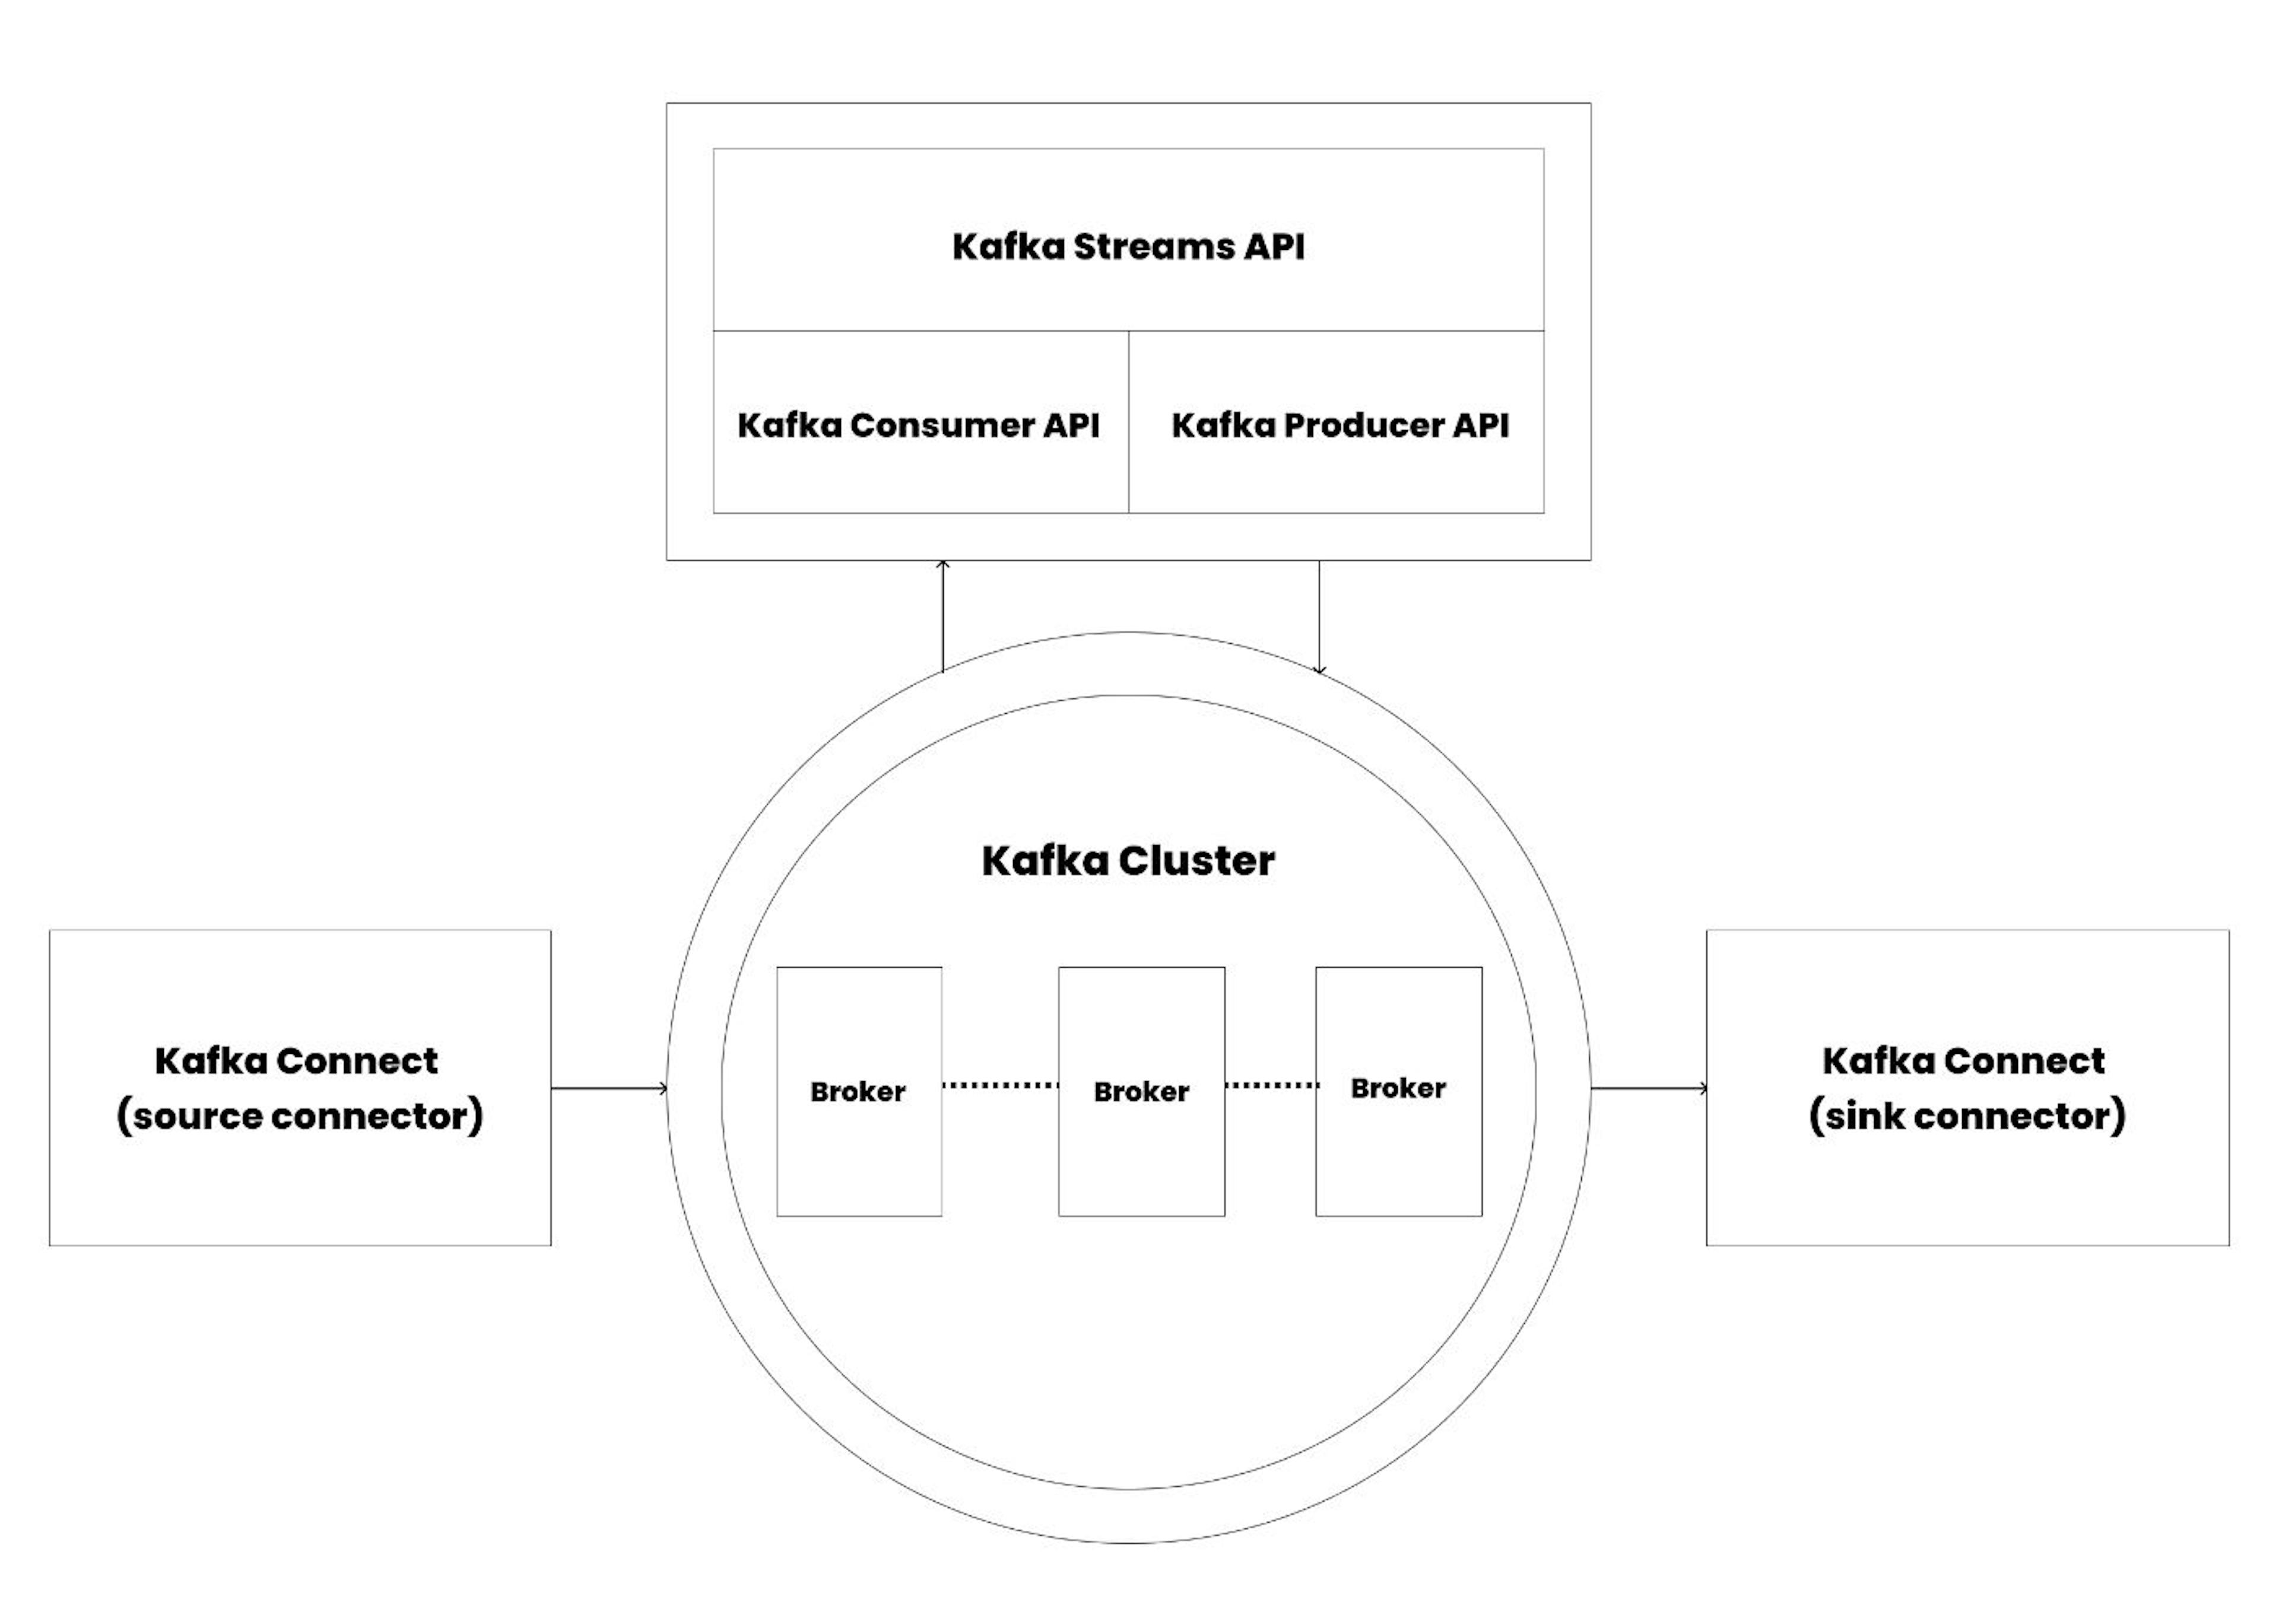 Figure 1: Overview of the Apache Kafka Architecture